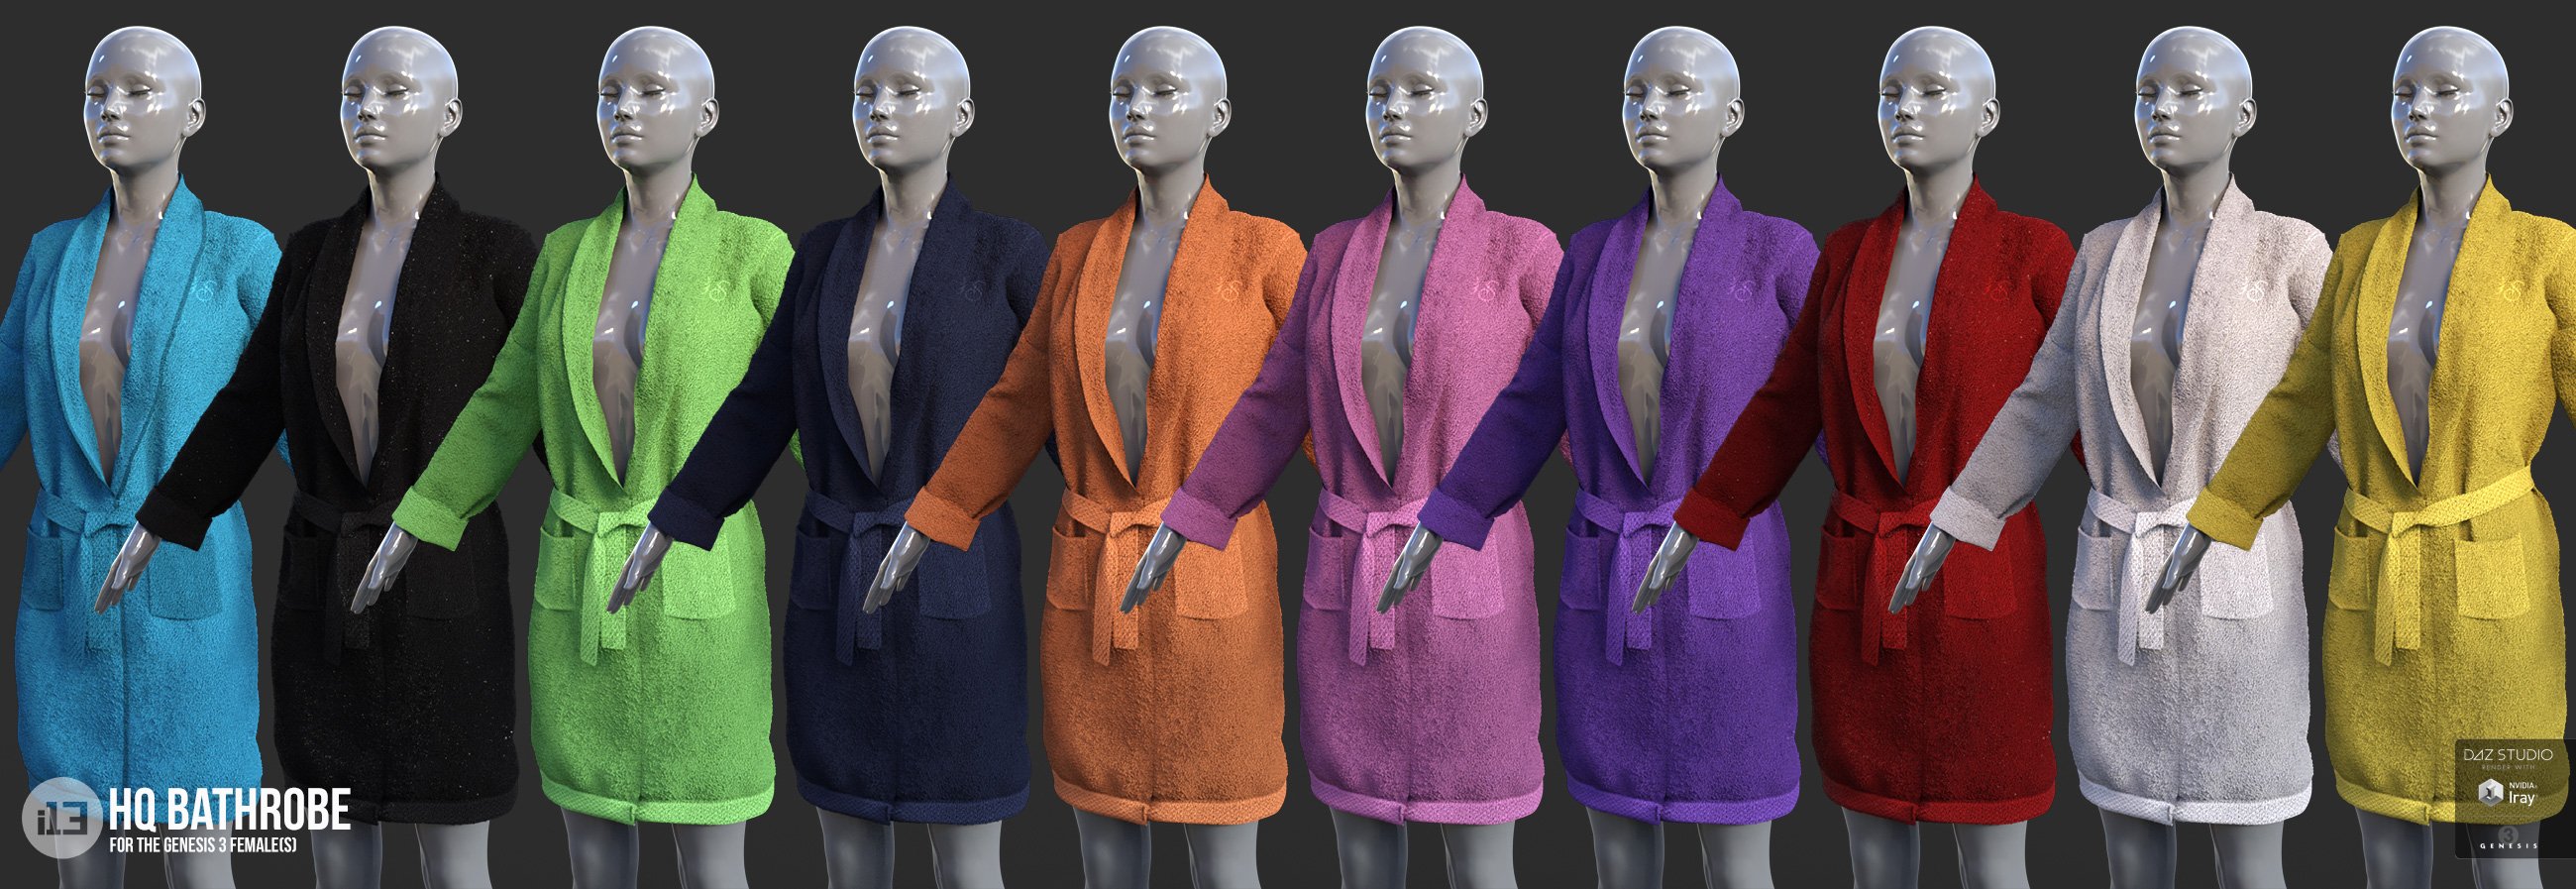 i13 HQ Bathrobe for the Genesis 3 Female(s) by: ironman13, 3D Models by Daz 3D